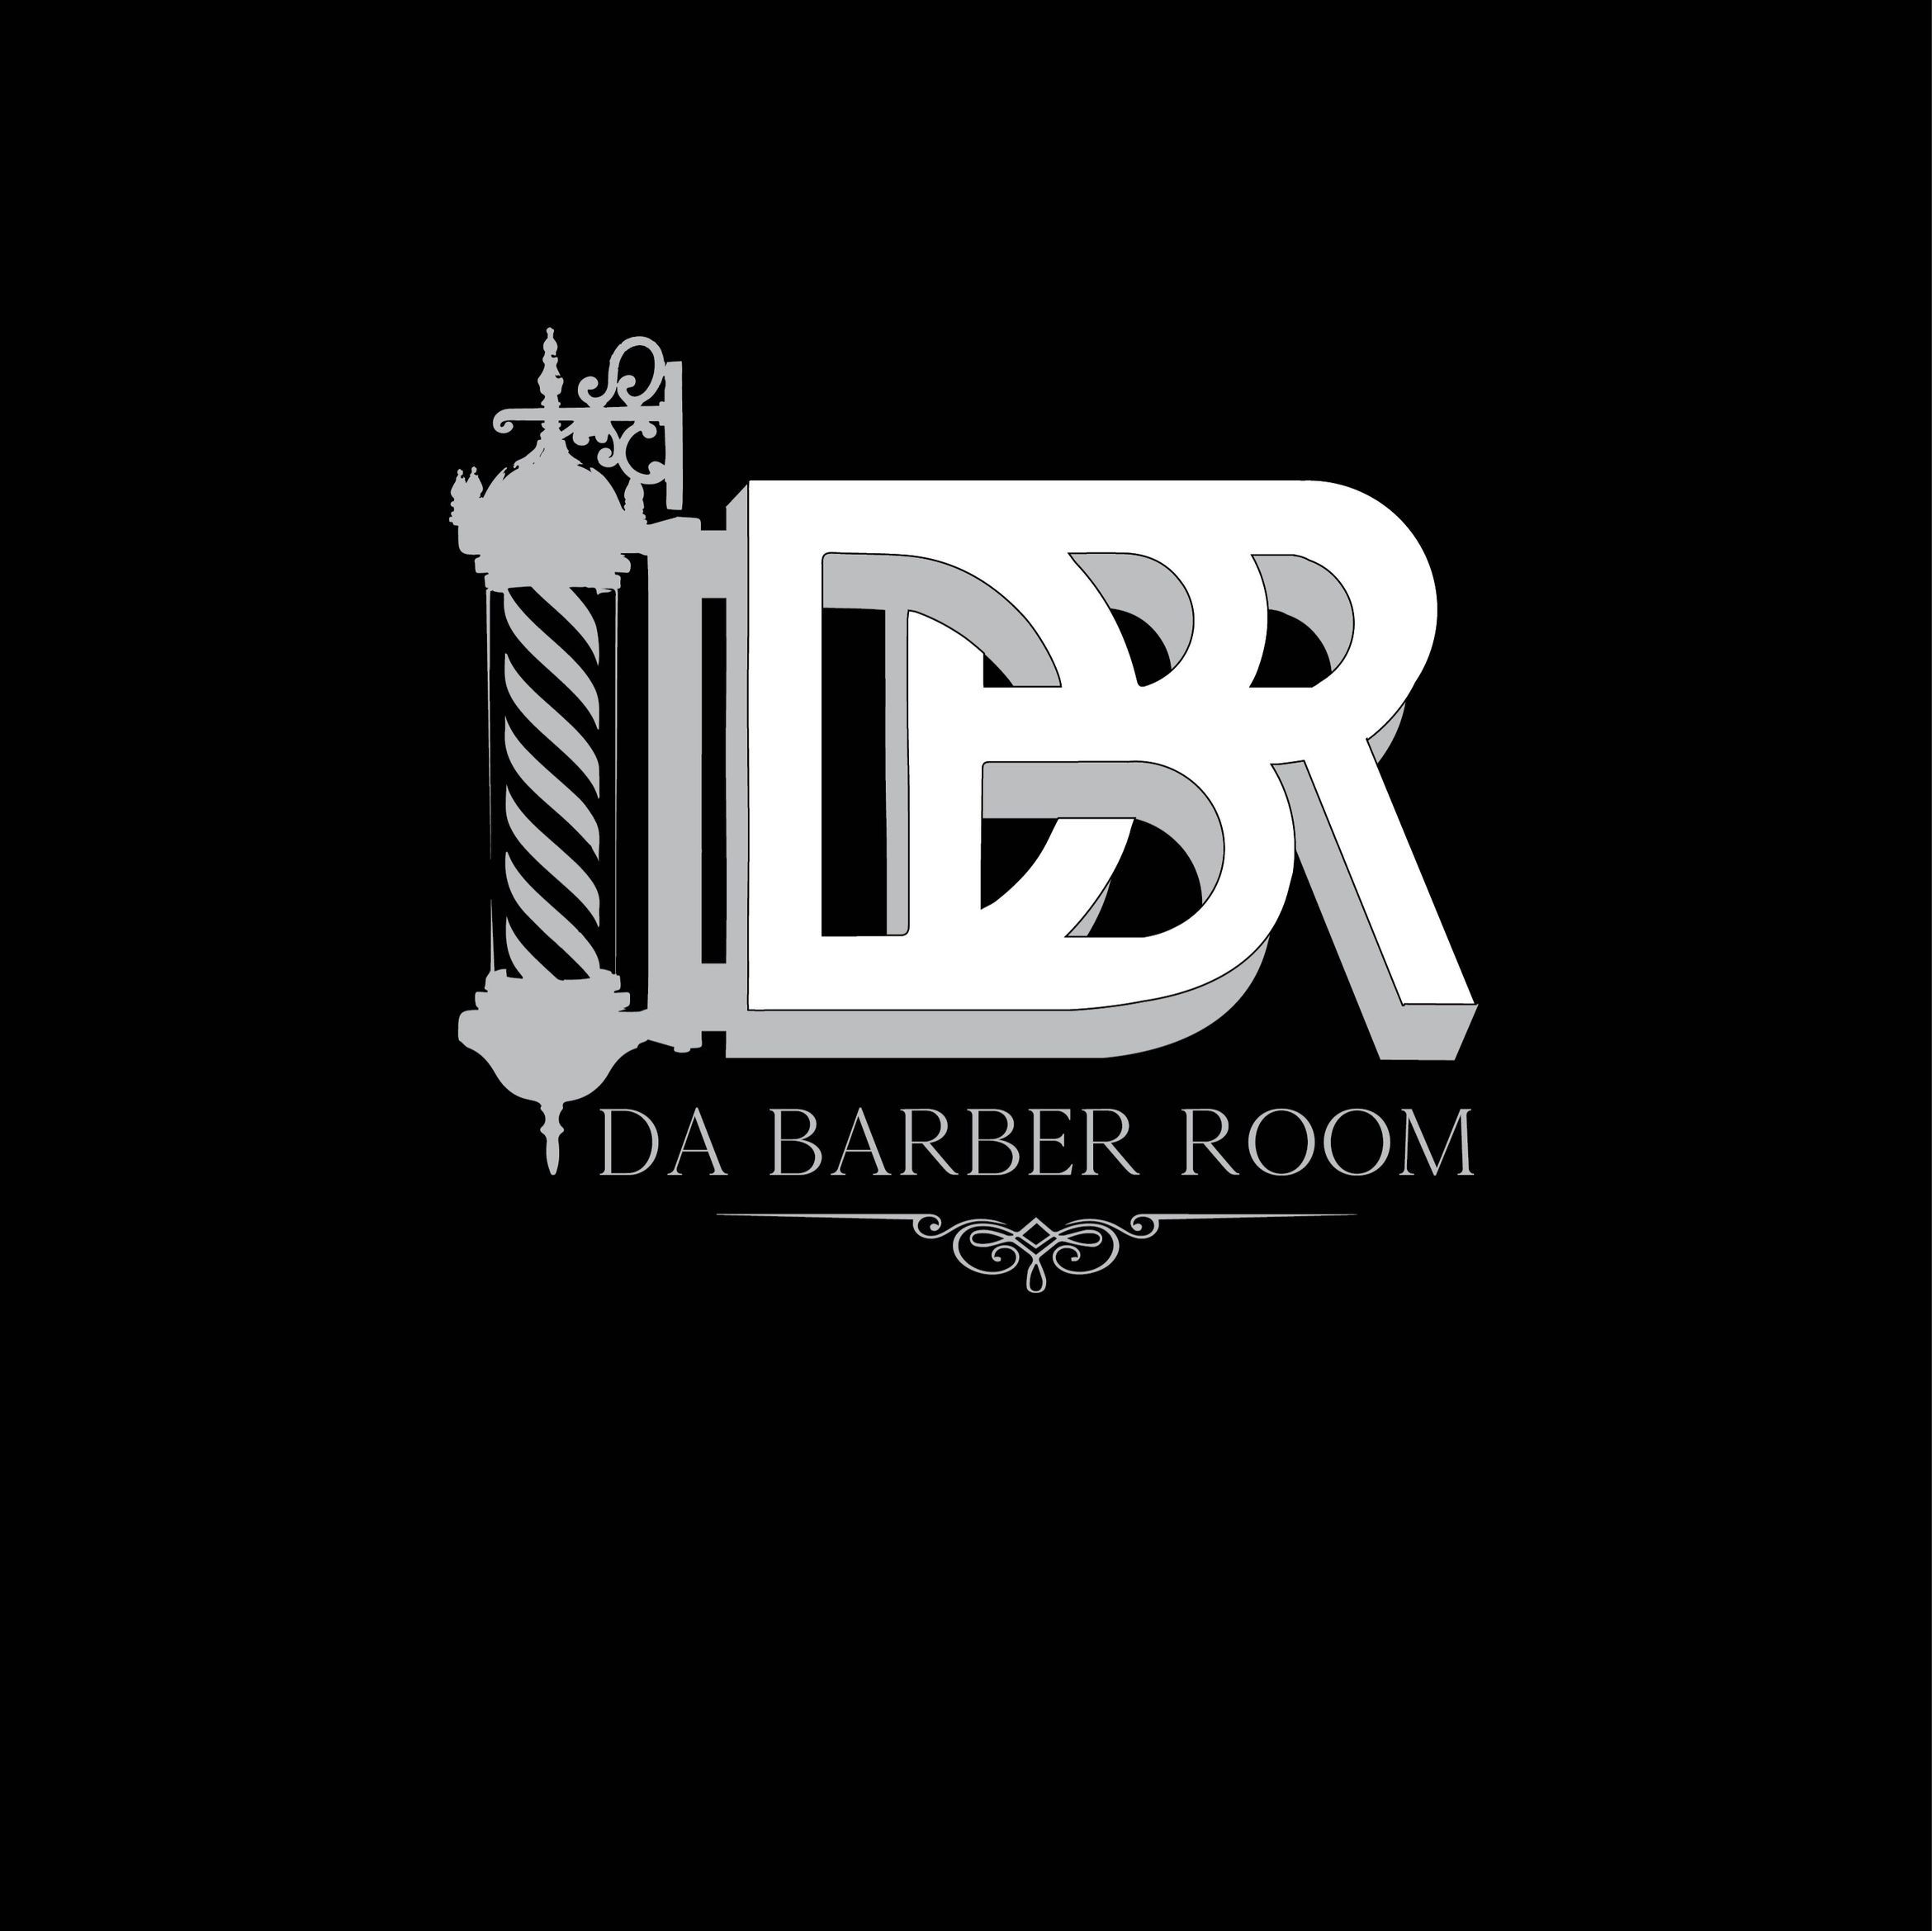 Finessedby Jdubb @DaBarberRoom, 1144 N. Clinton Ave, Suite #1, Rochester, 14621